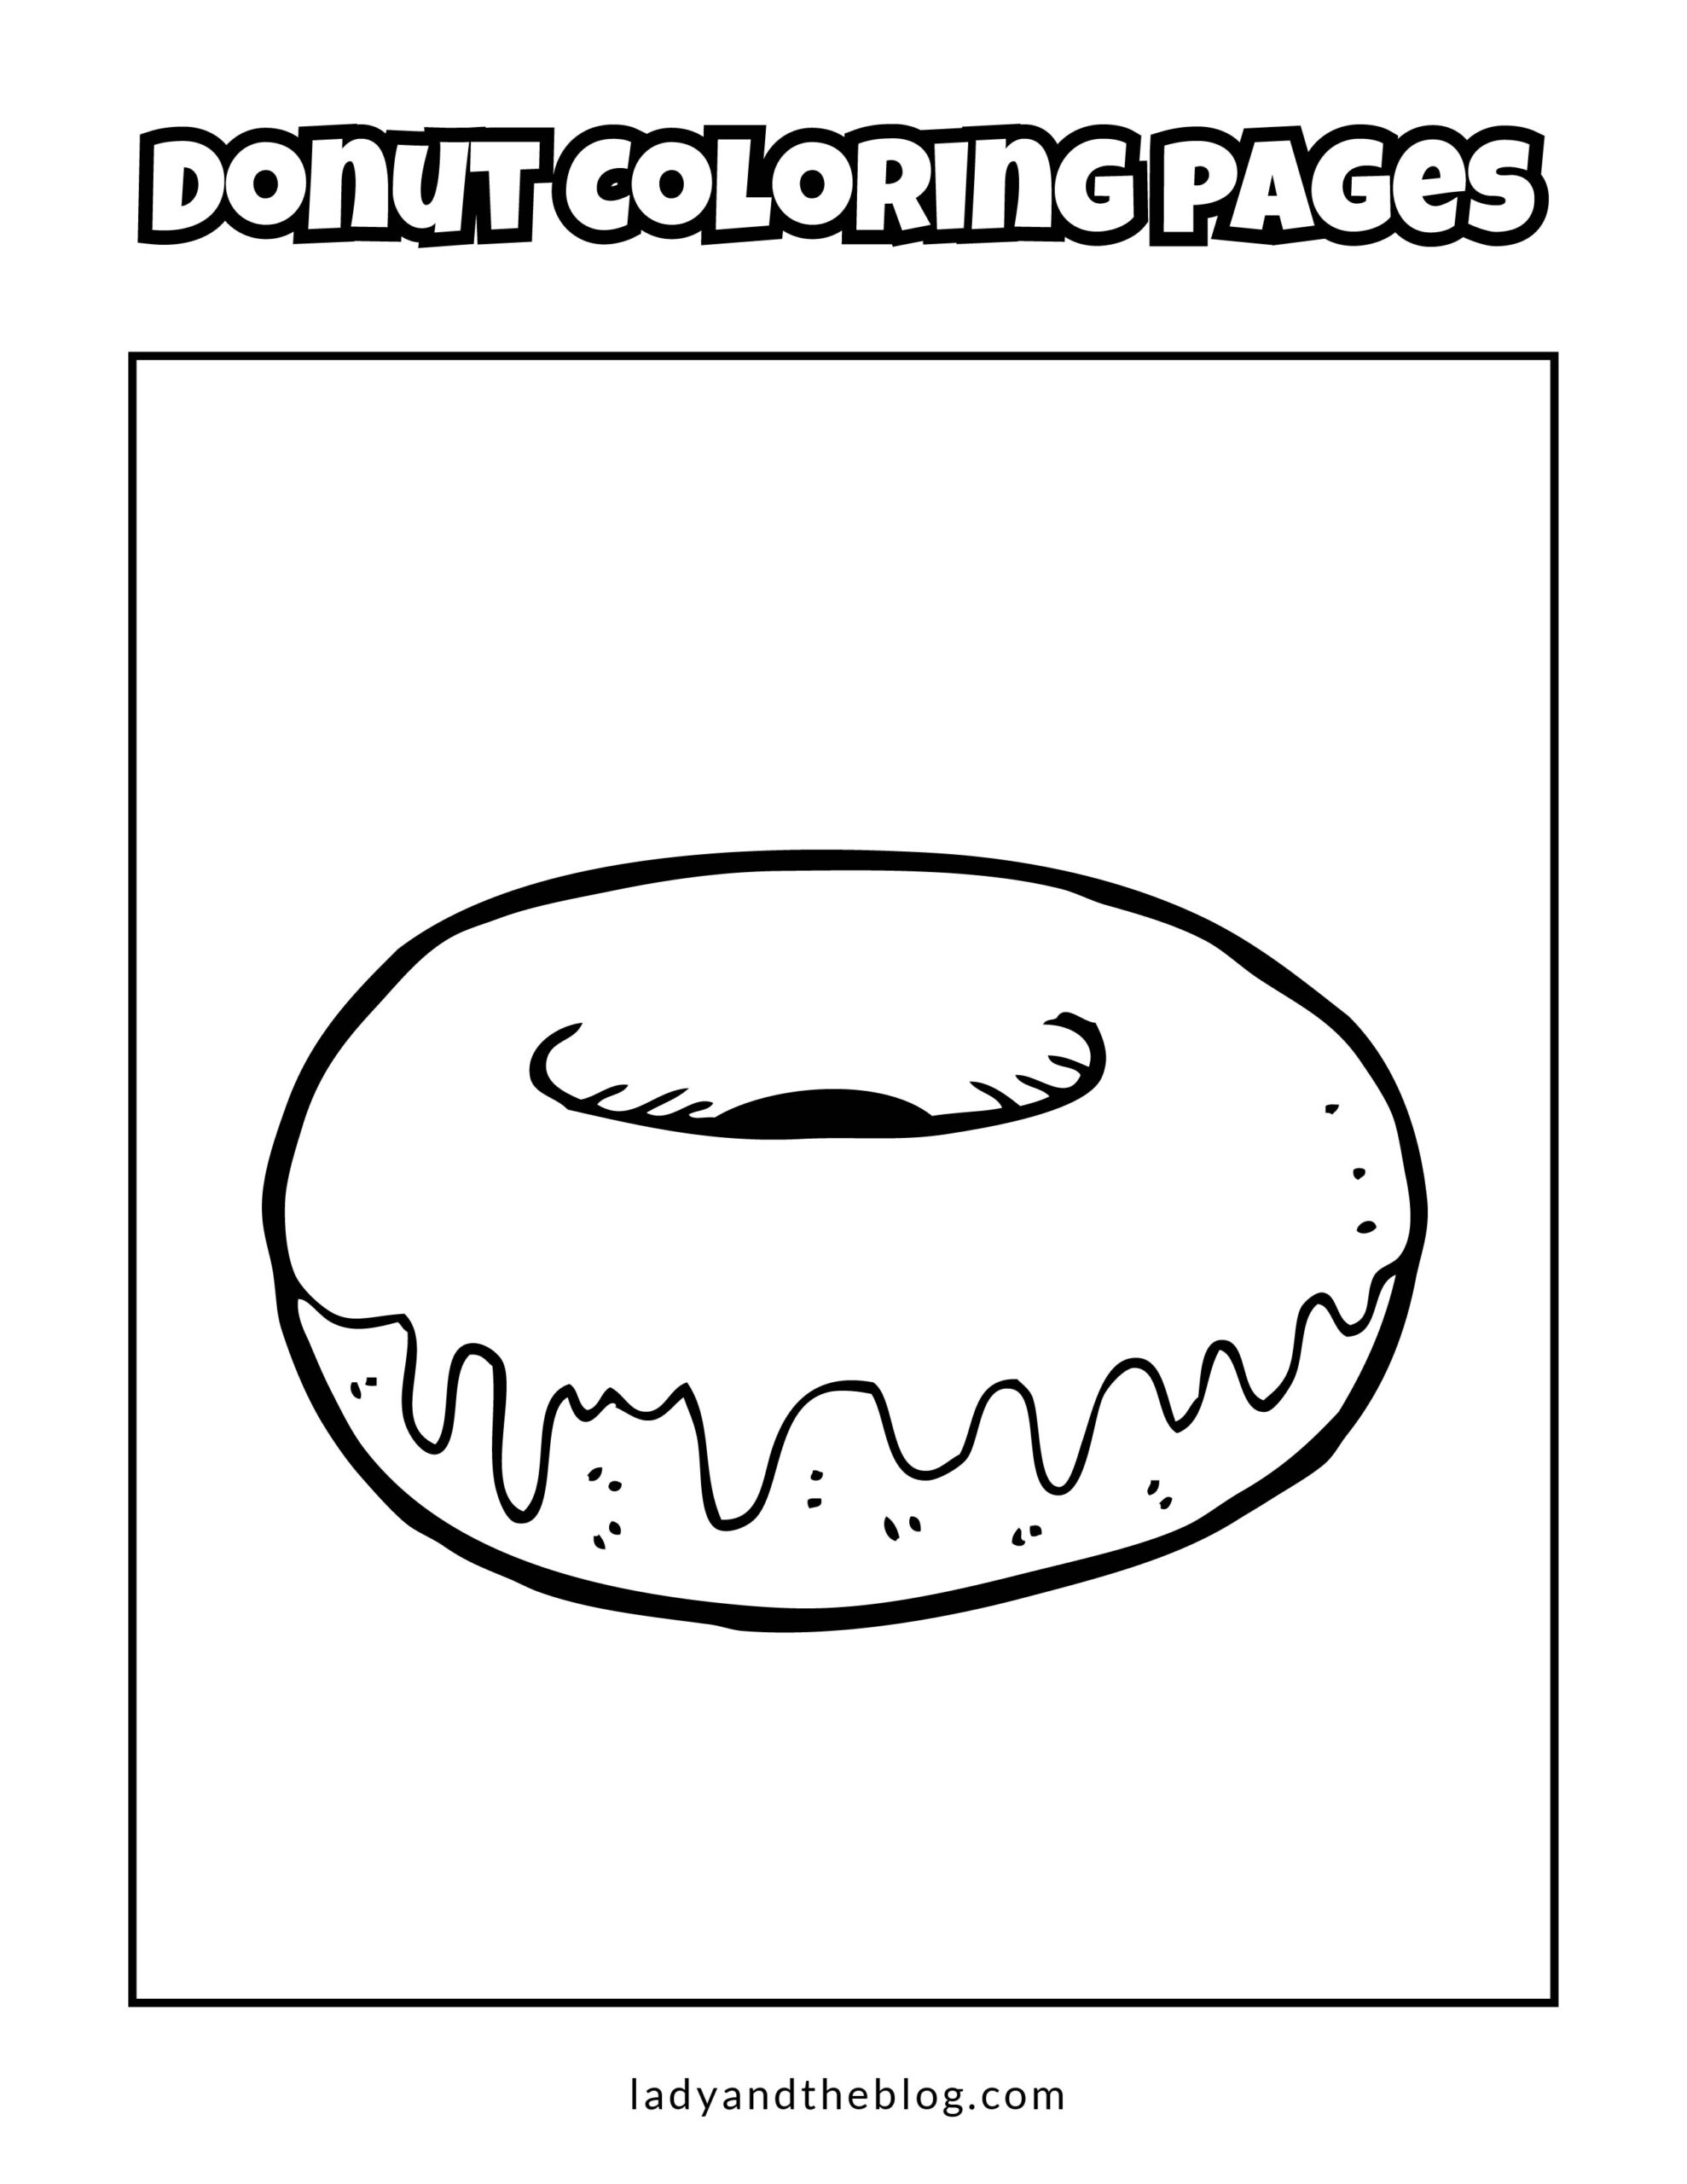 Donut Coloring Pages   Breakfast Coloring Pages For Kids